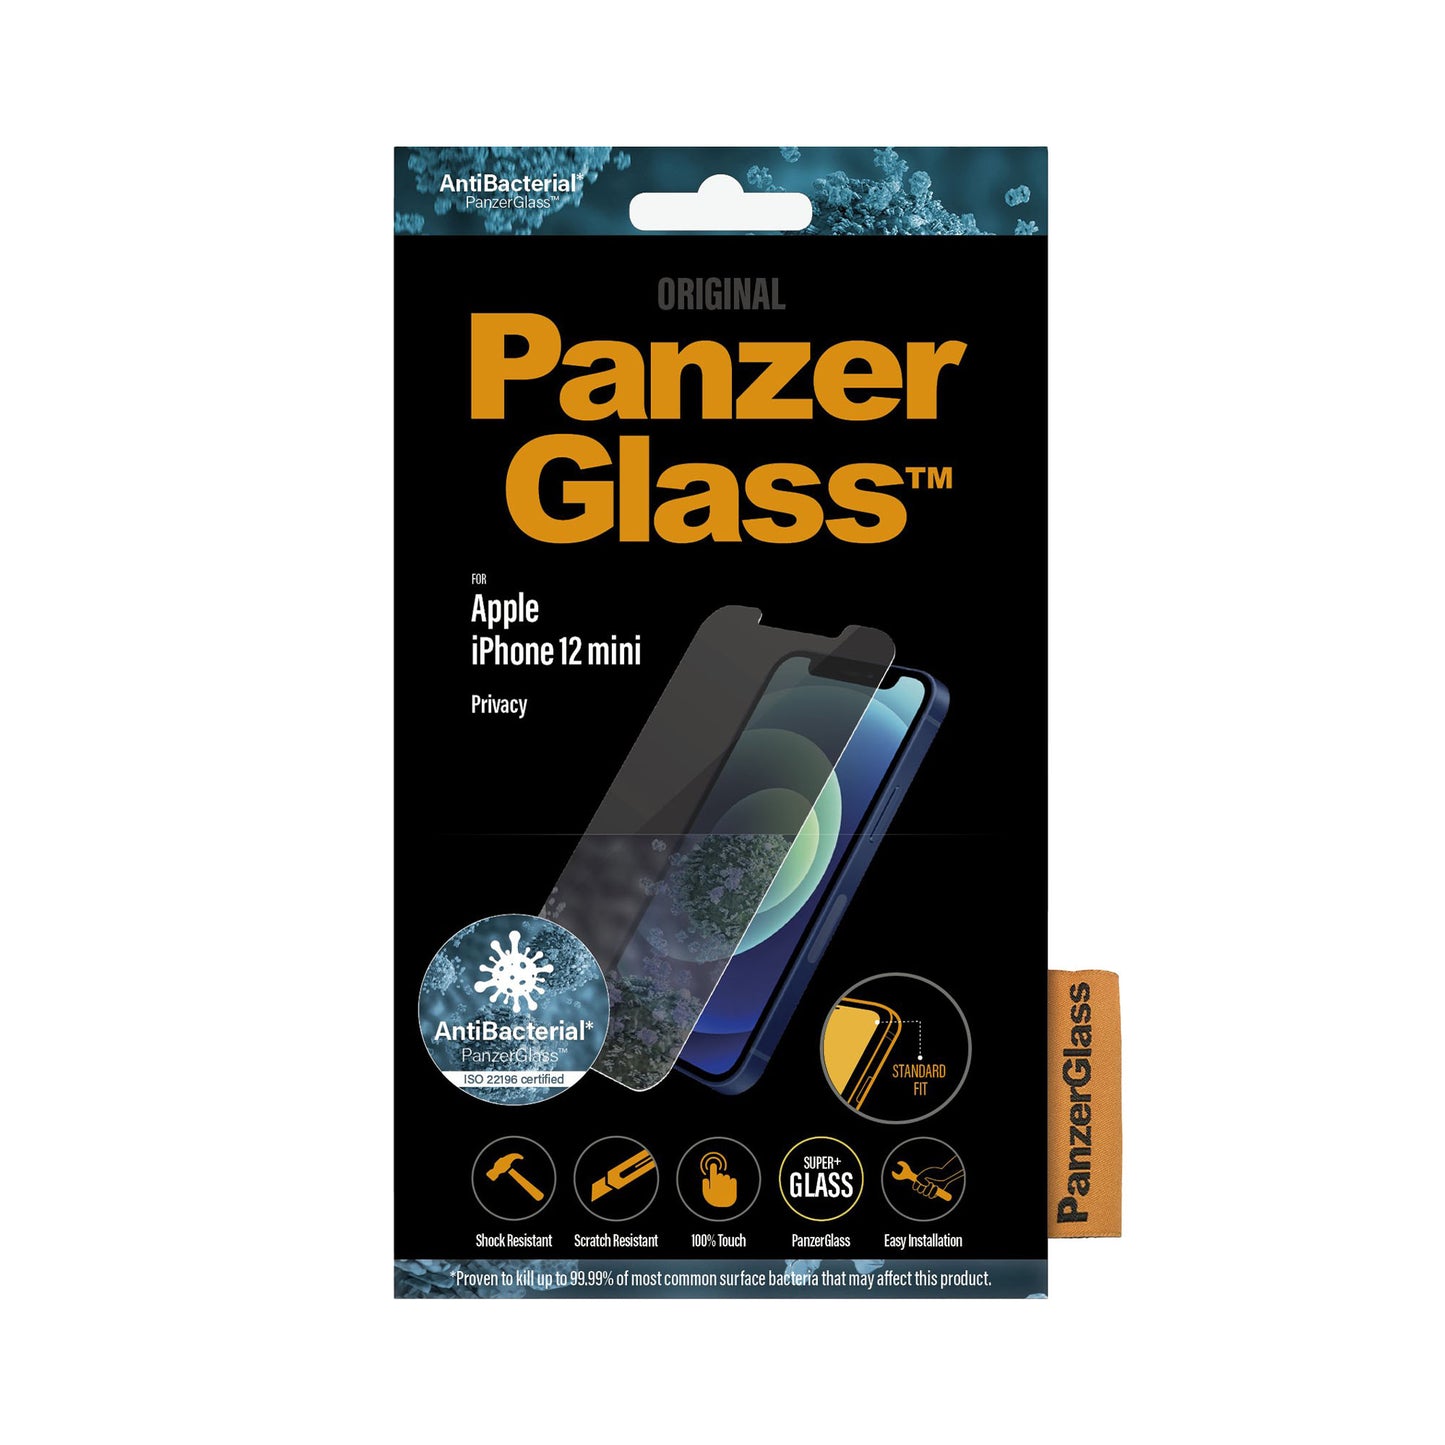 PANZERGLASS Standard Fit for iPhone 12 mini - Privacy